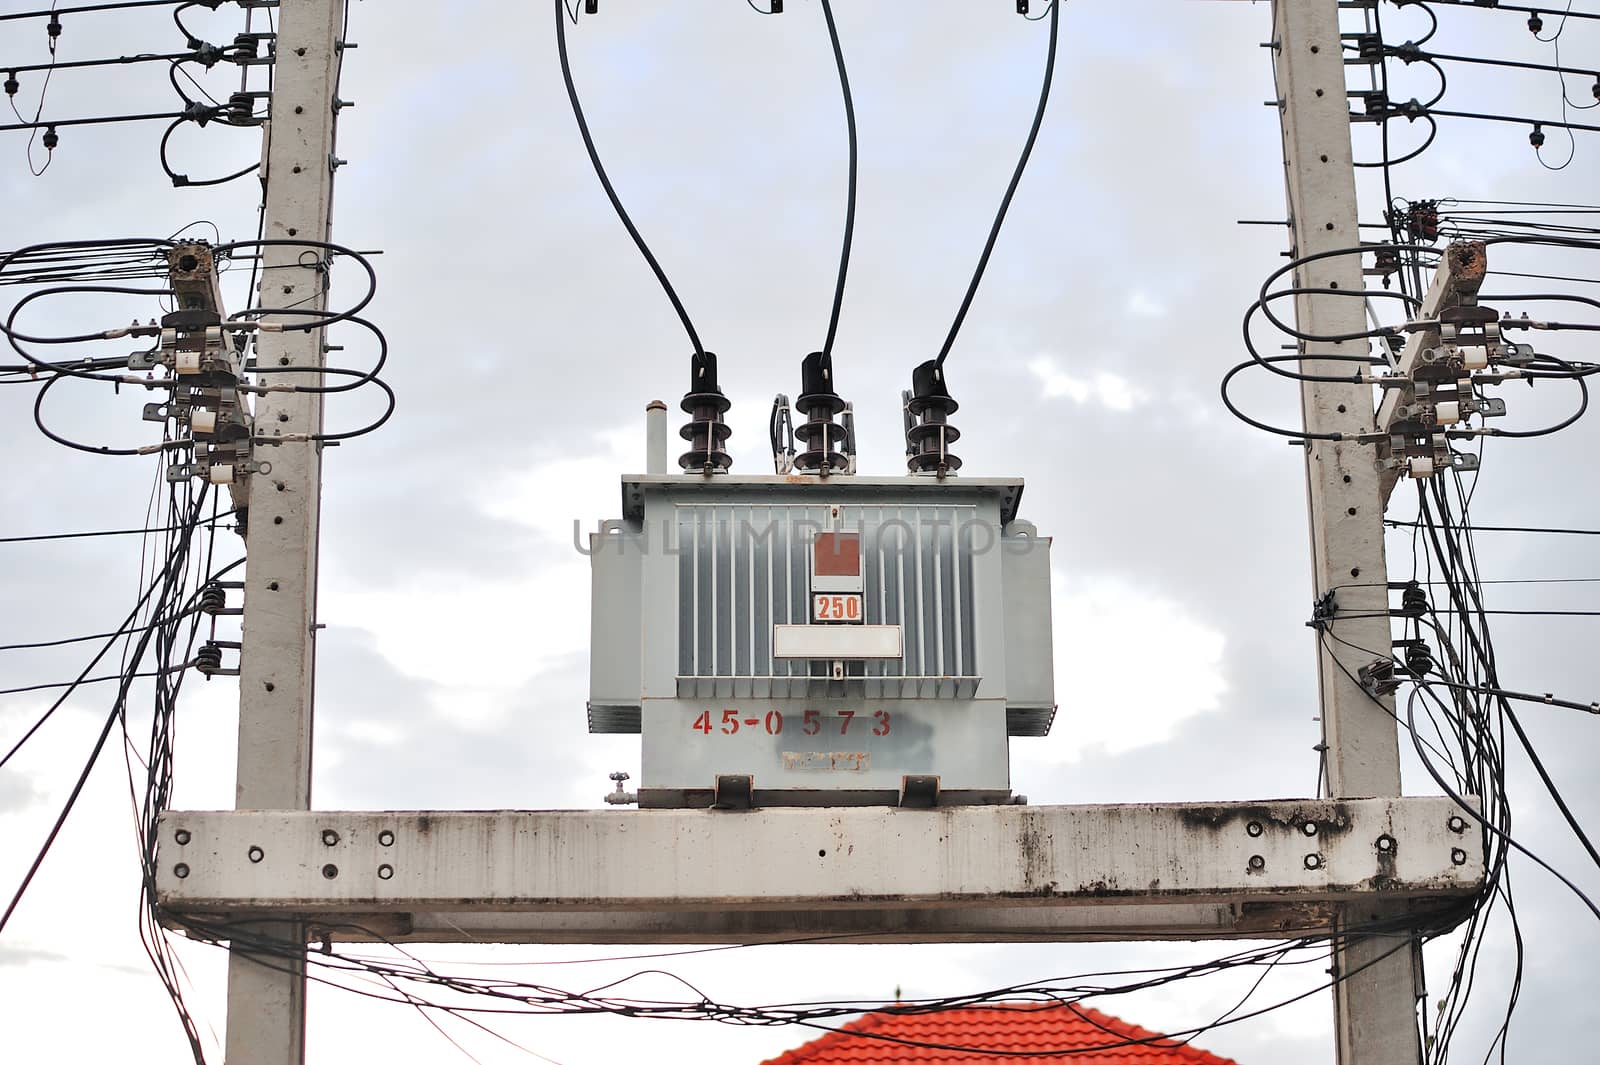 transformer on high power station. High voltage by sommai